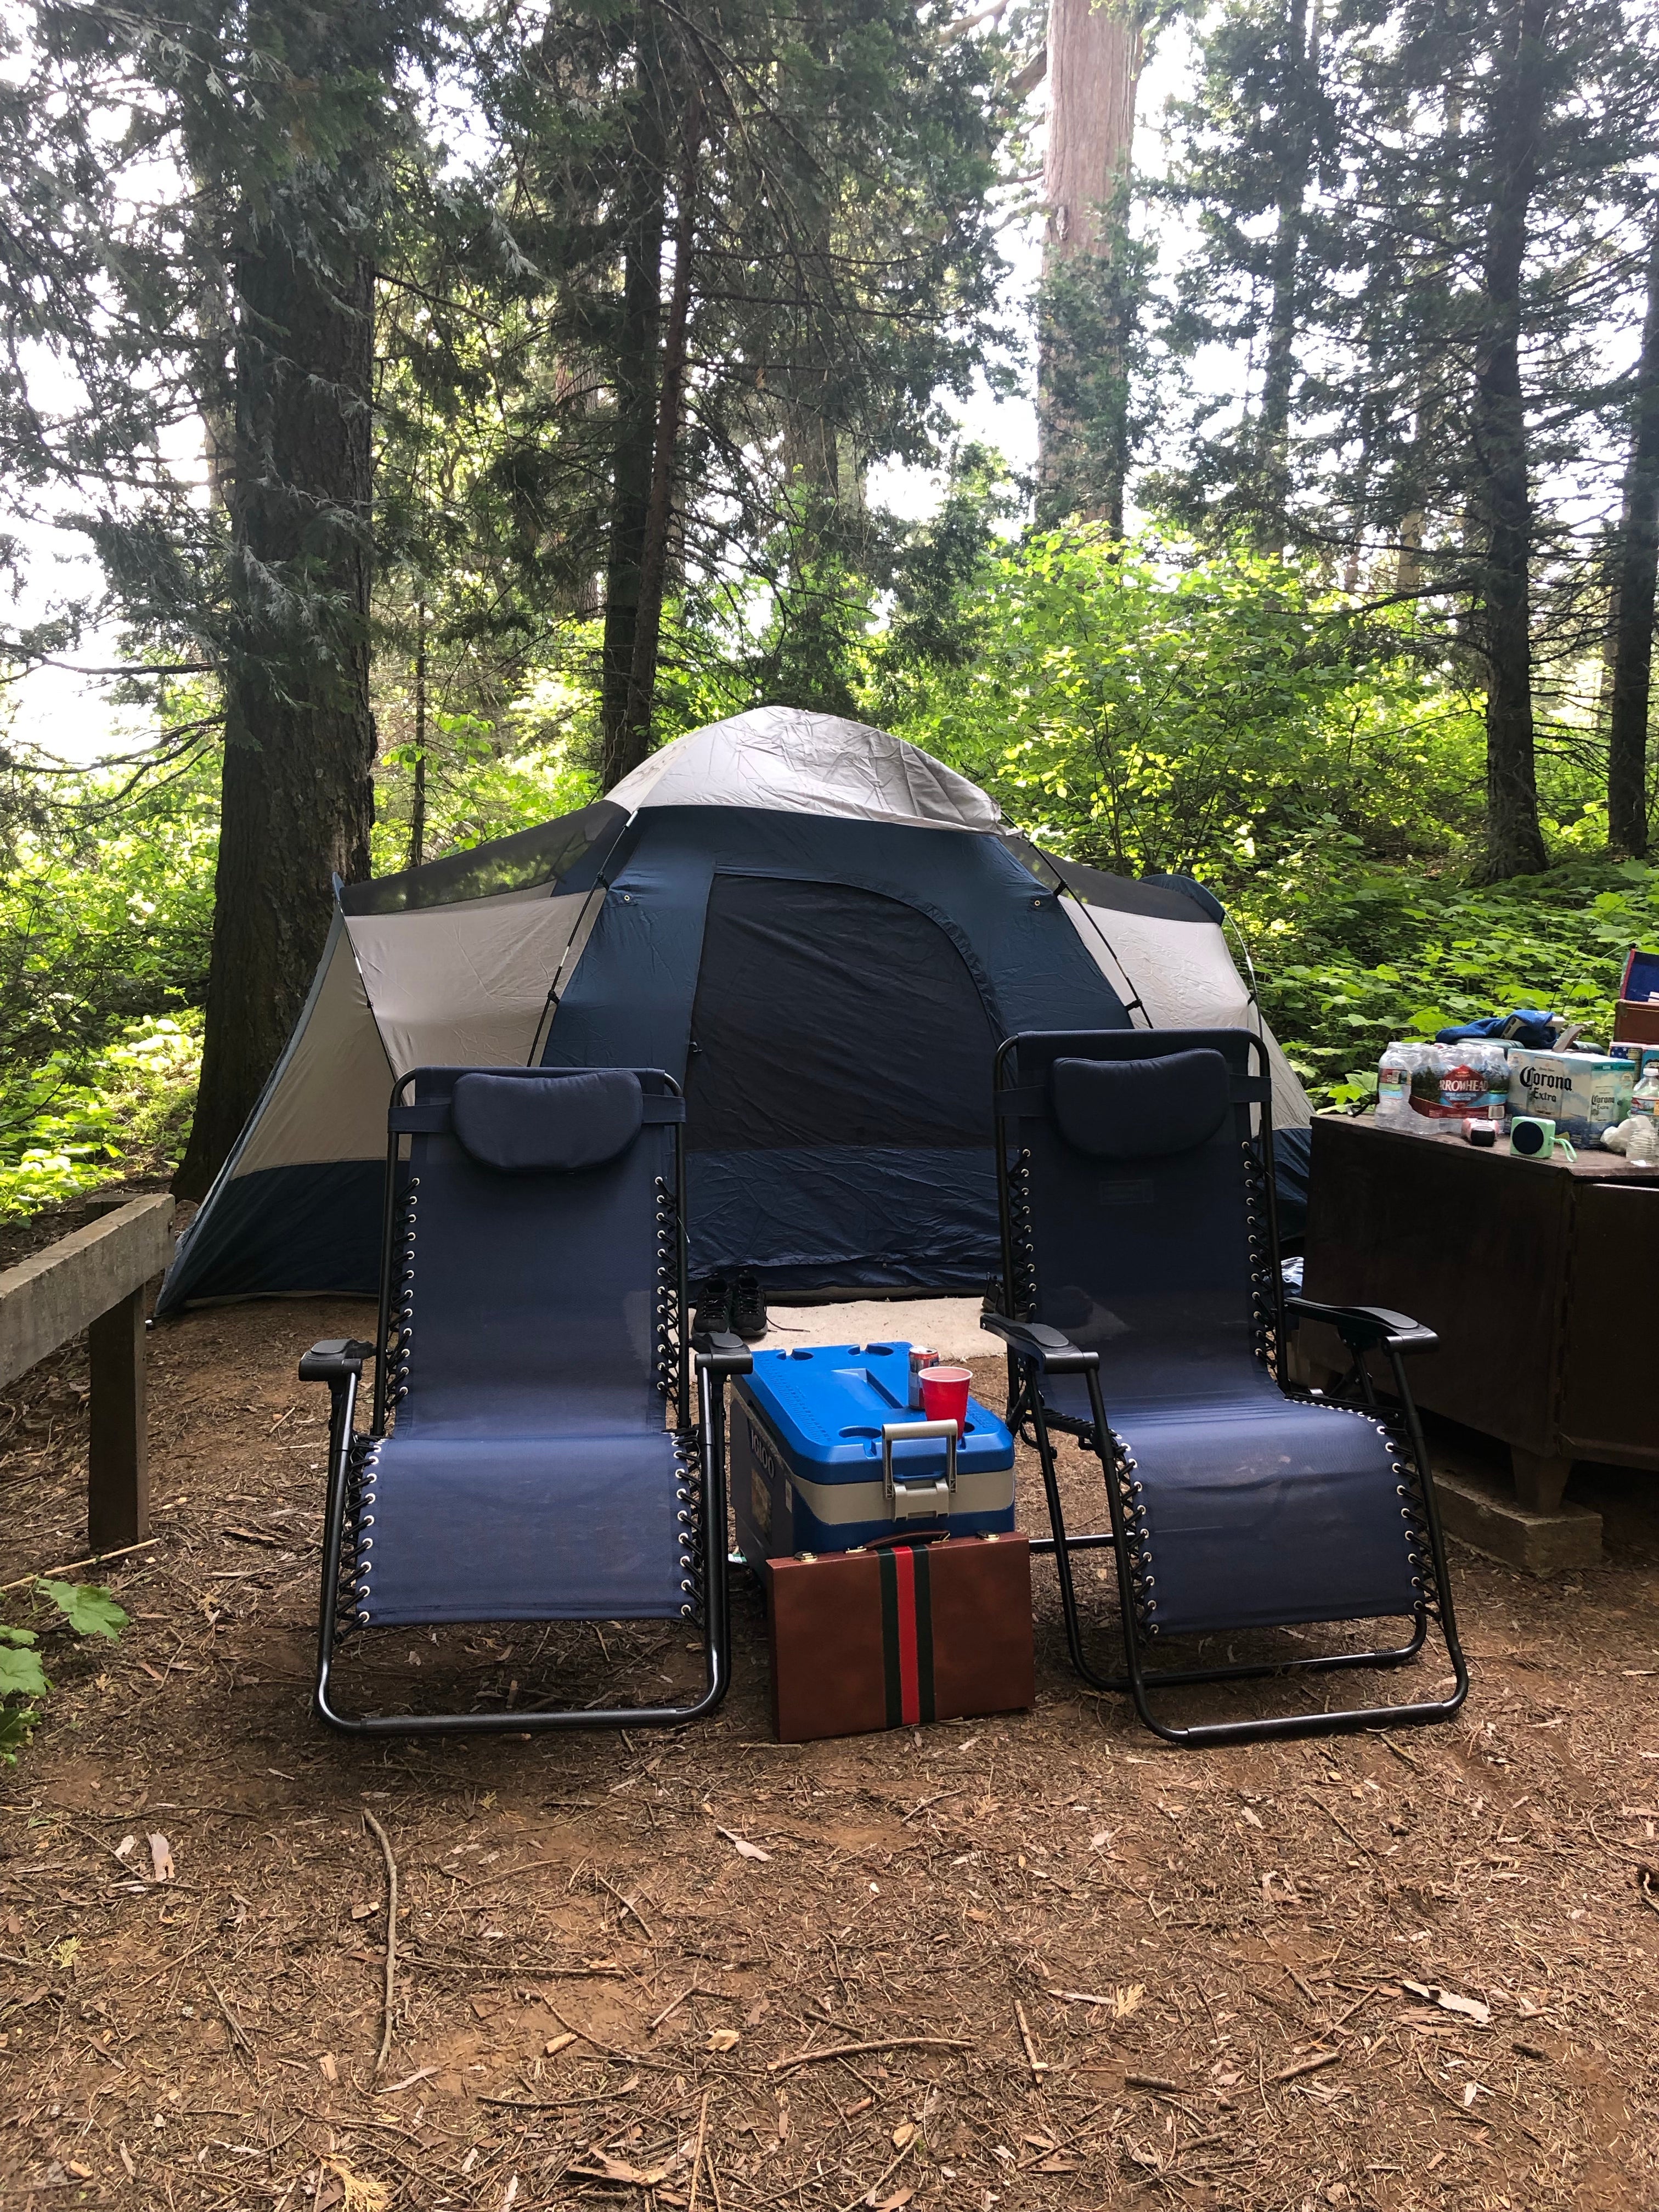 Camper submitted image from Hedrick Pond Campground - 5